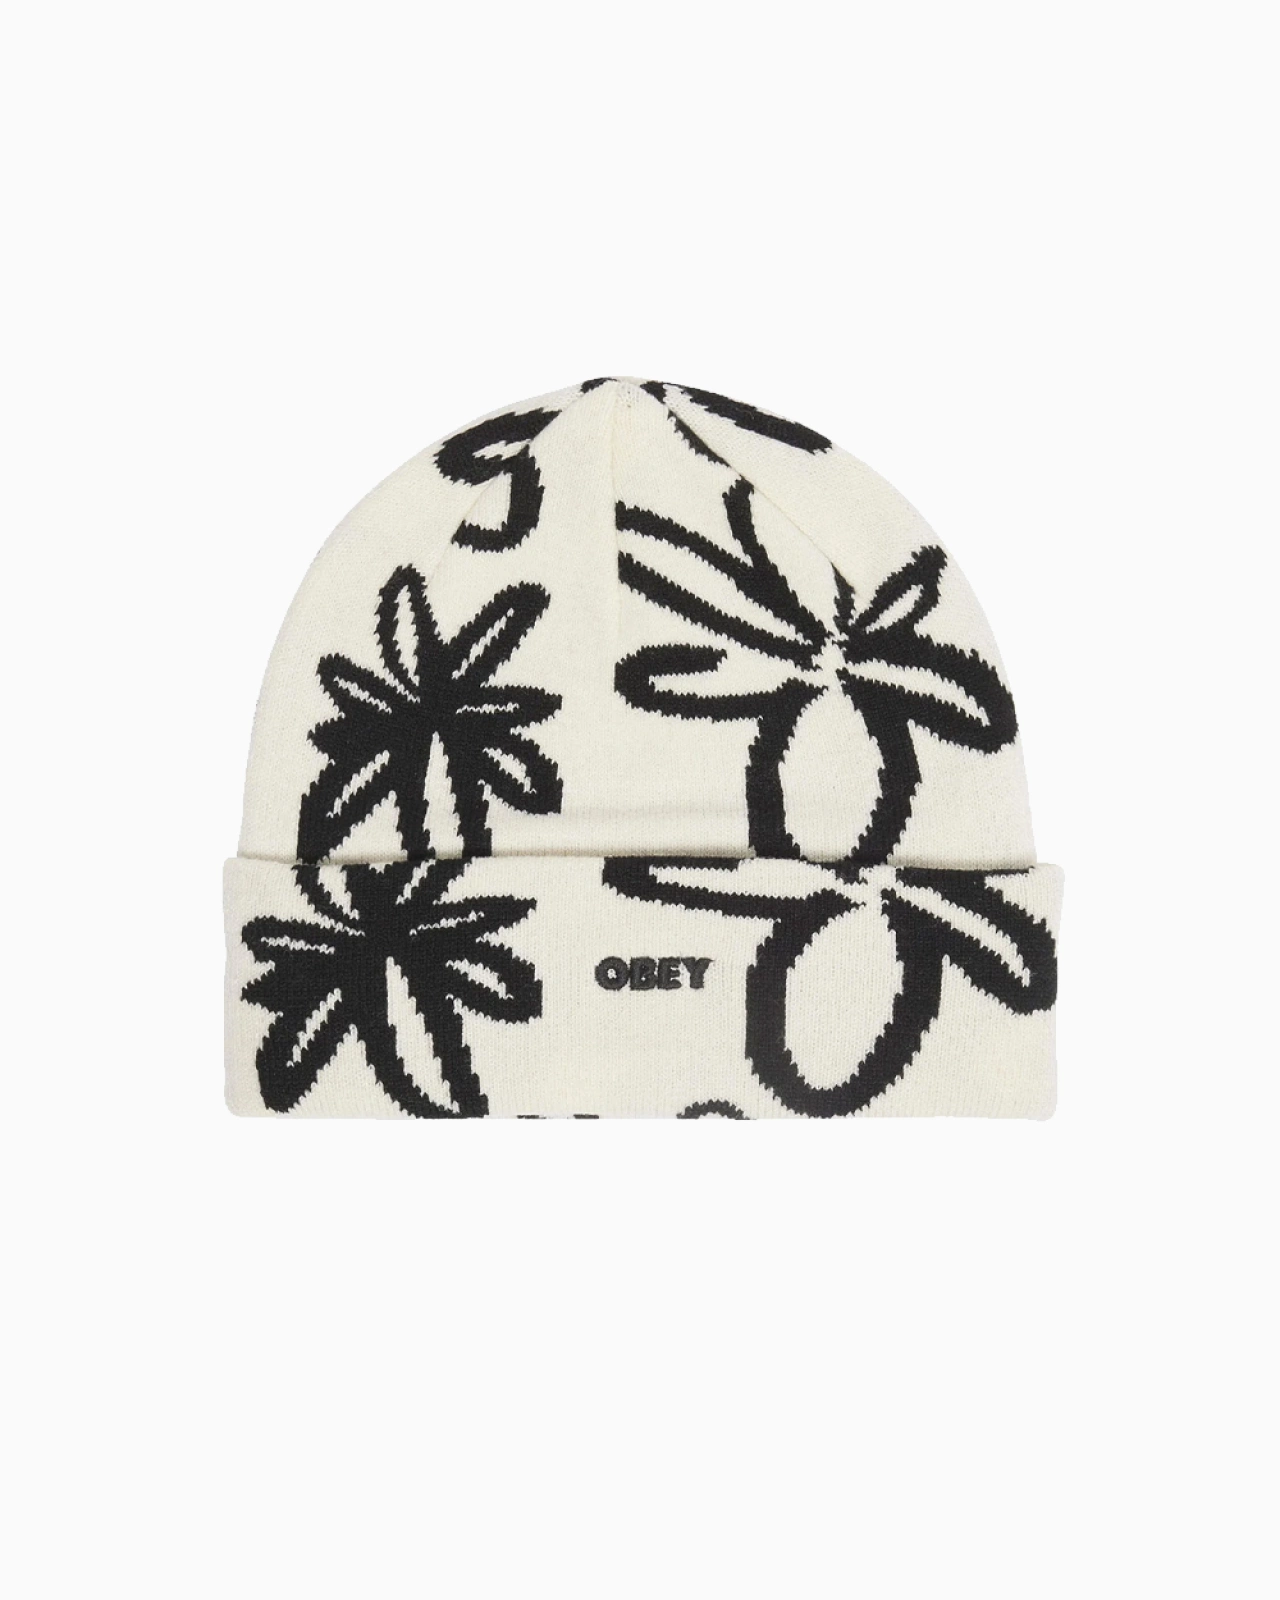 Obey: Шапка Obey Diana Beanie